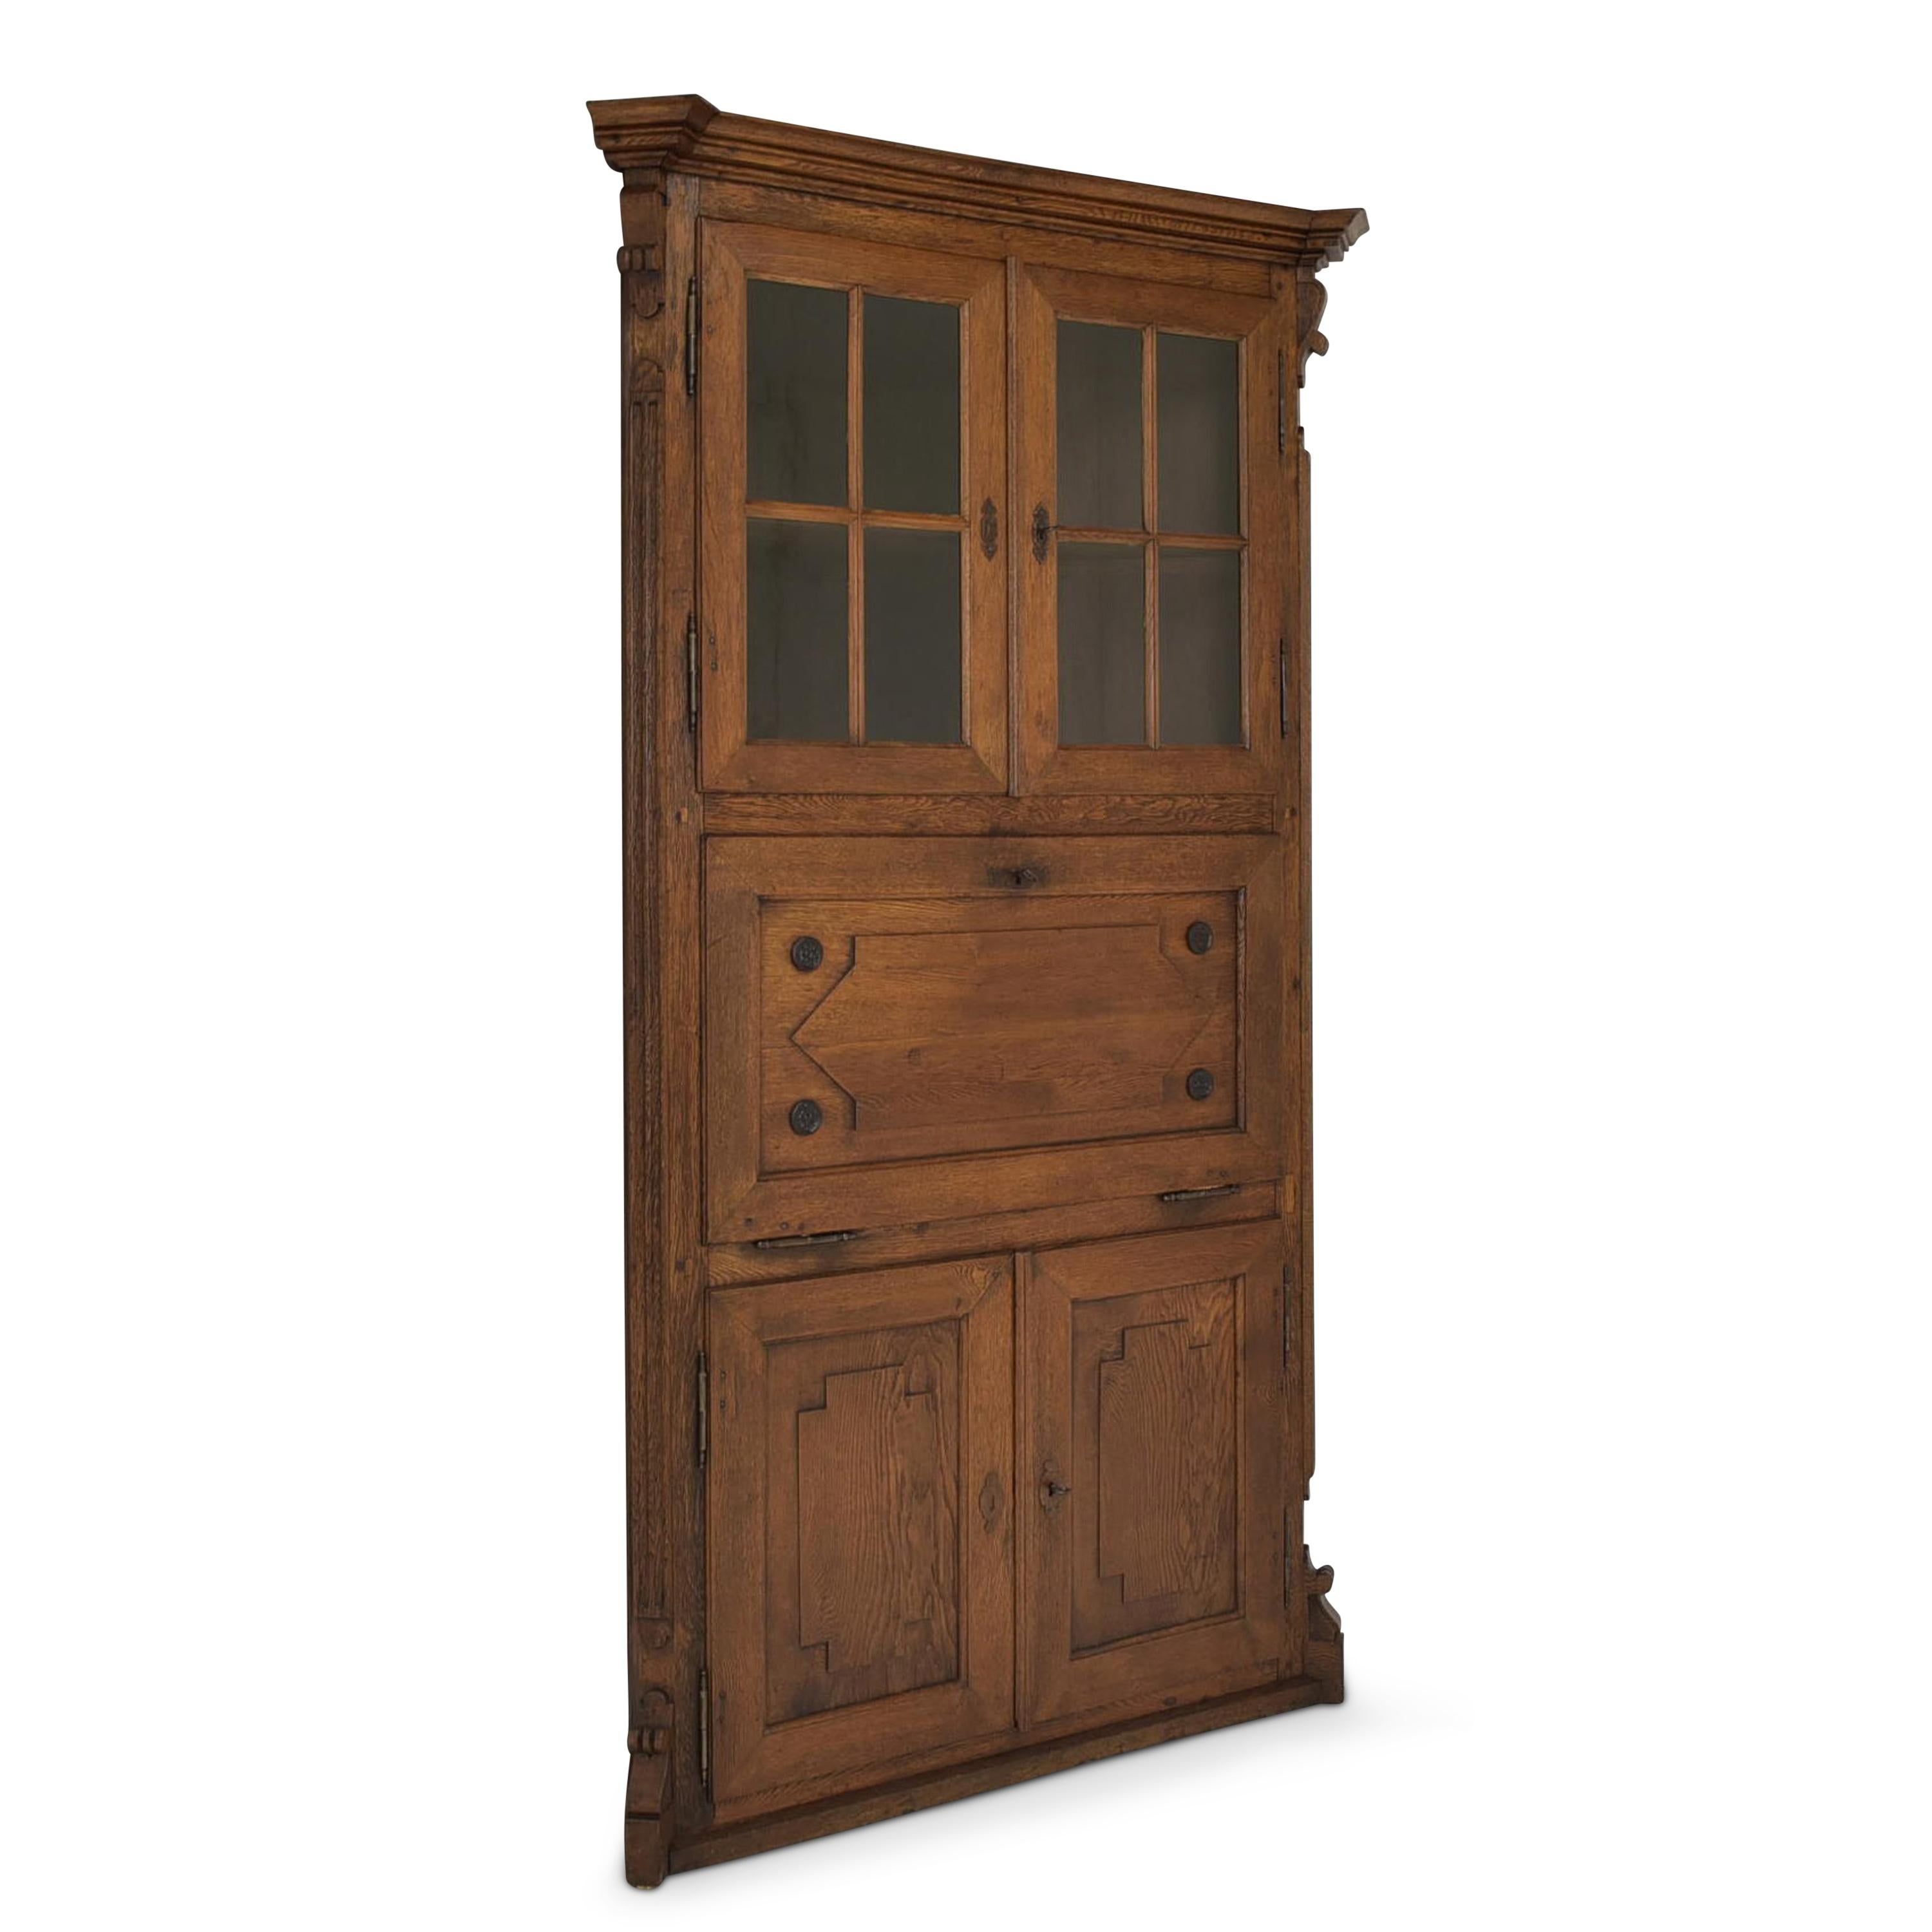 Corner cupboard restored Wilhelminian period around 1870 oak corner display cabinet secretary

Features:
Triple divided with 2 times 2 doors and a folding compartment
Heavy quality
High quality
Original glazing
Very nice patina
Attractive